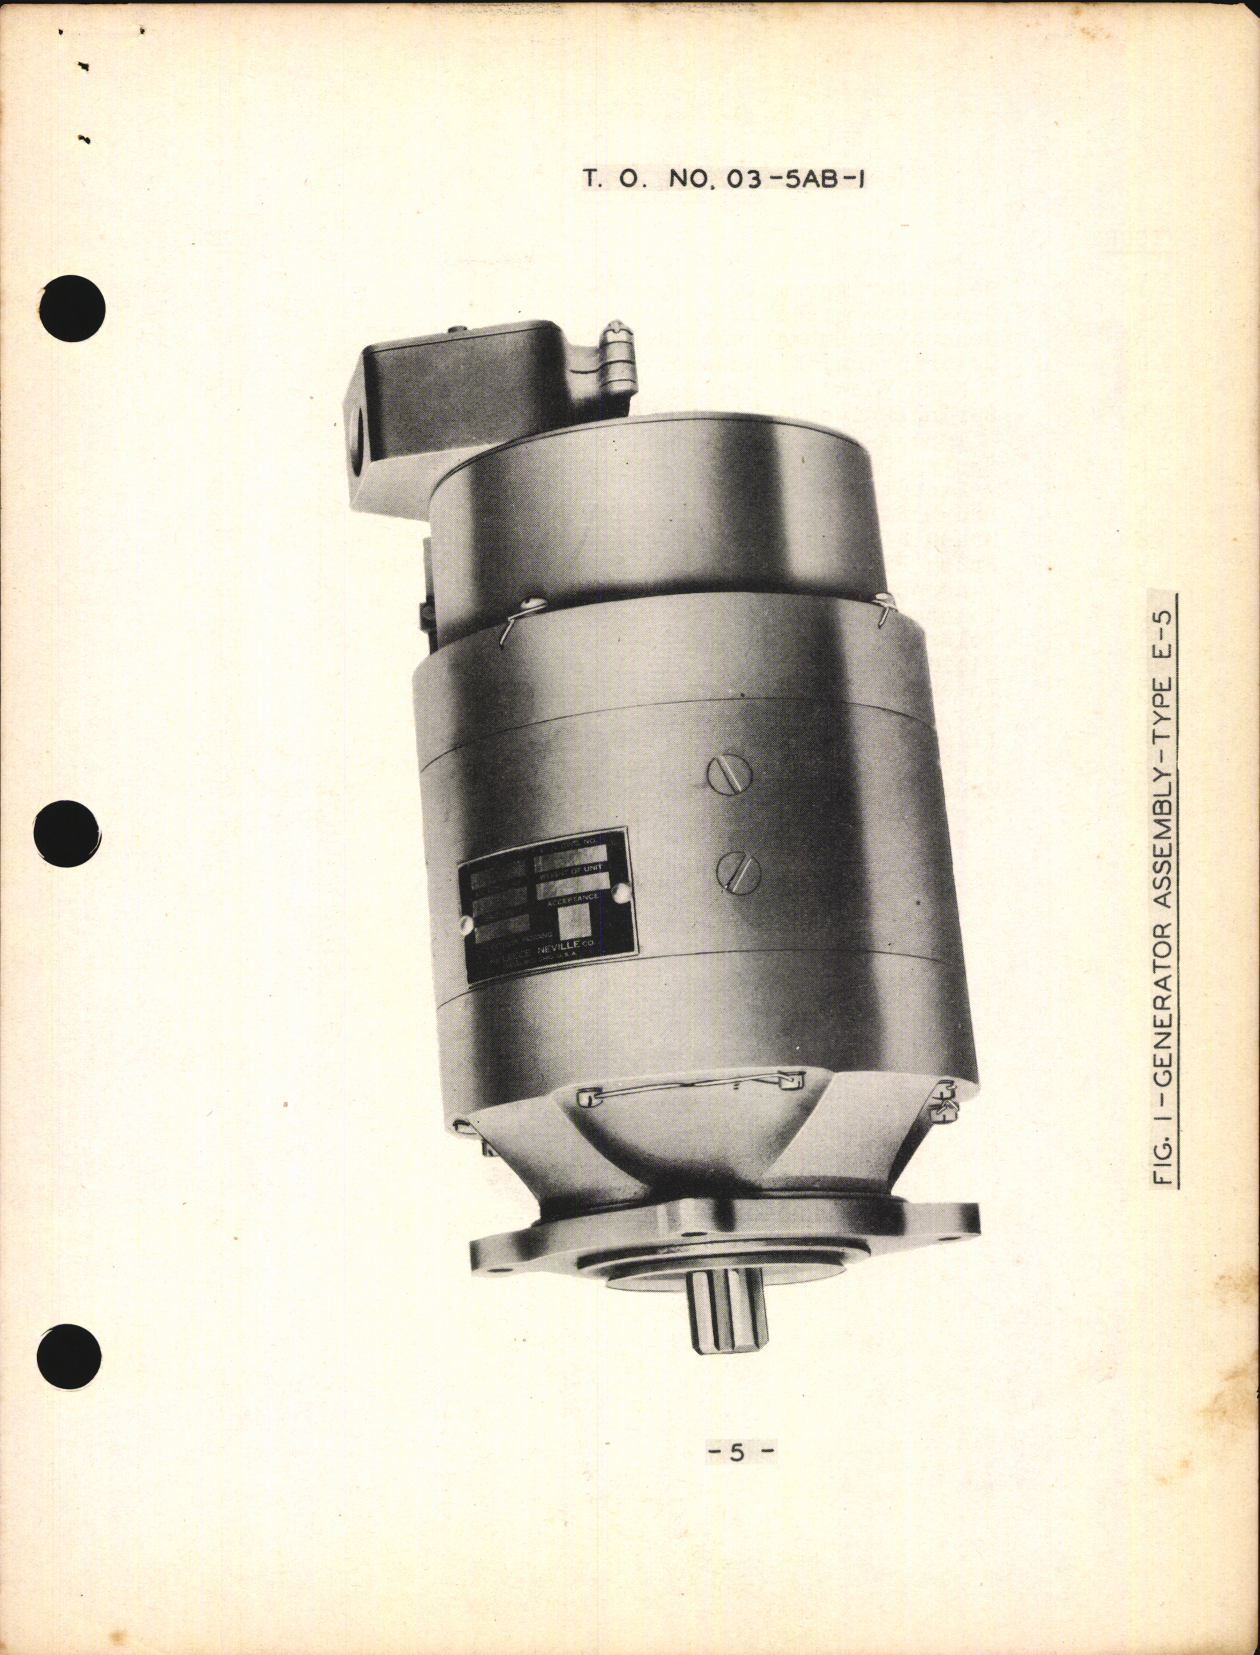 Sample page 7 from AirCorps Library document: Handbook of Instructions with Parts Catalog for Aircraft Engine Generators and Control Box Types E5, E8, and D4